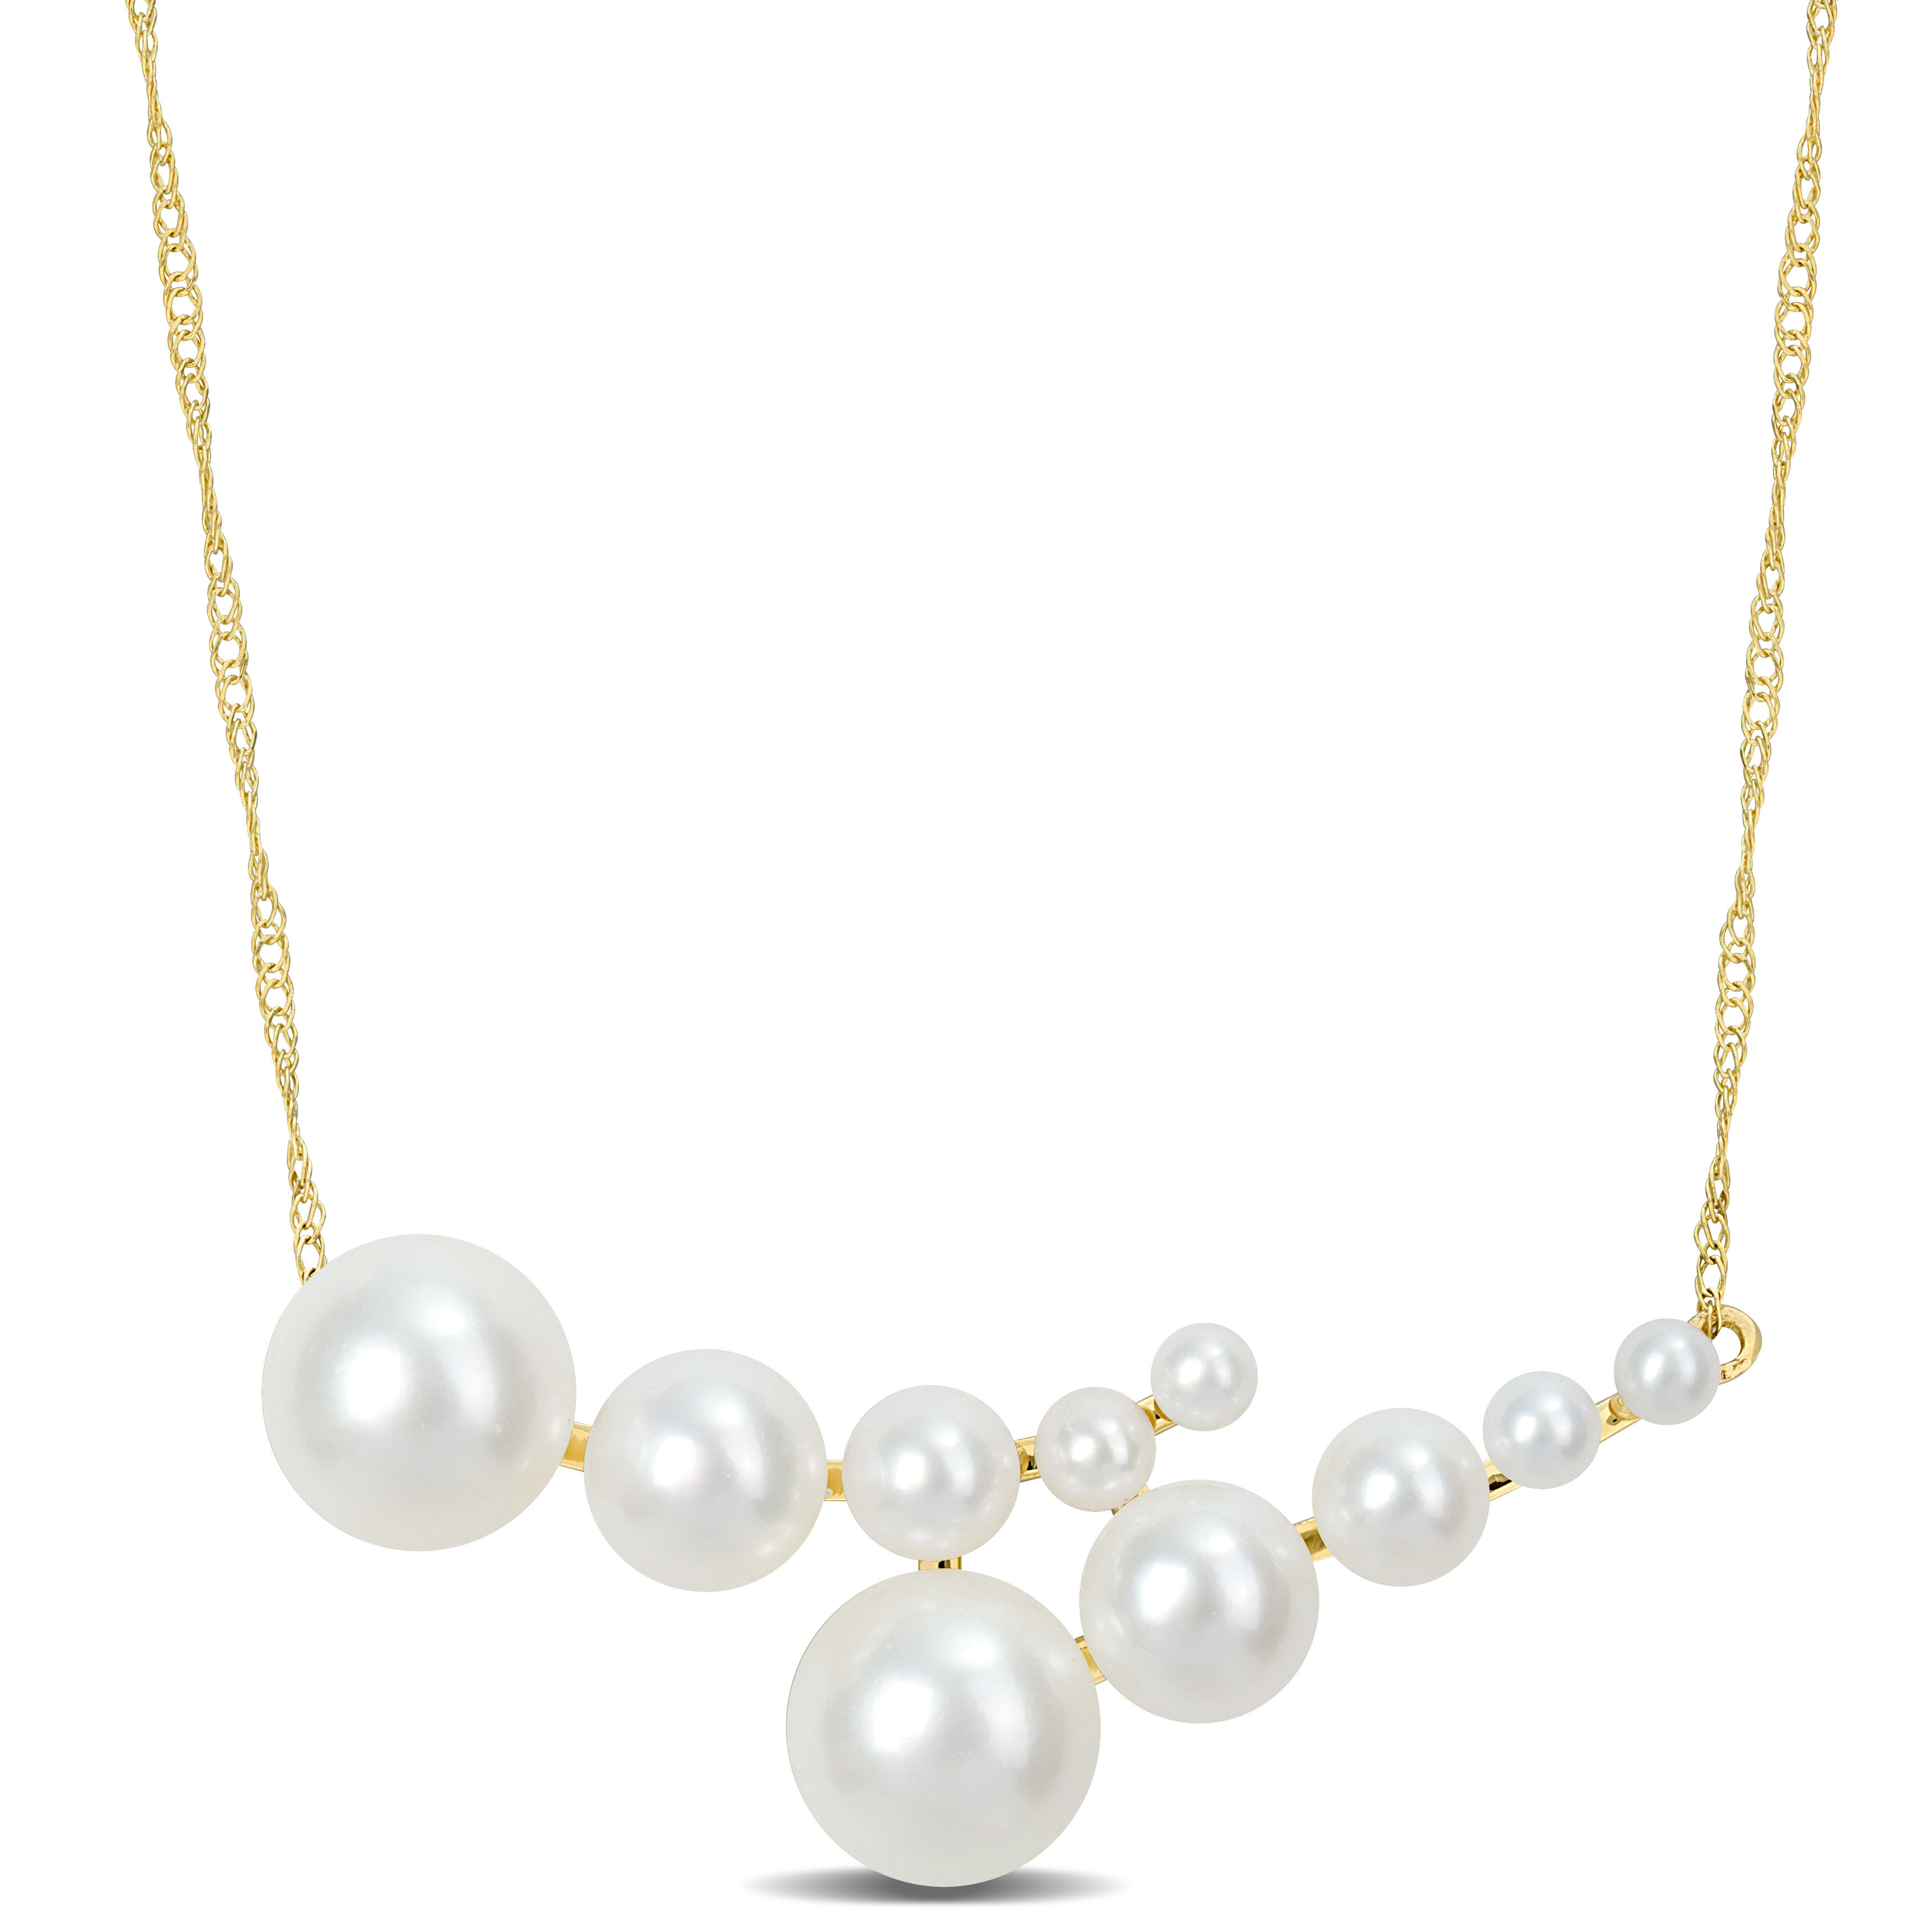 2-7 MM Graduated Cultured Freshwater Pearl Necklace in 14k Yellow Gold - 17 in.